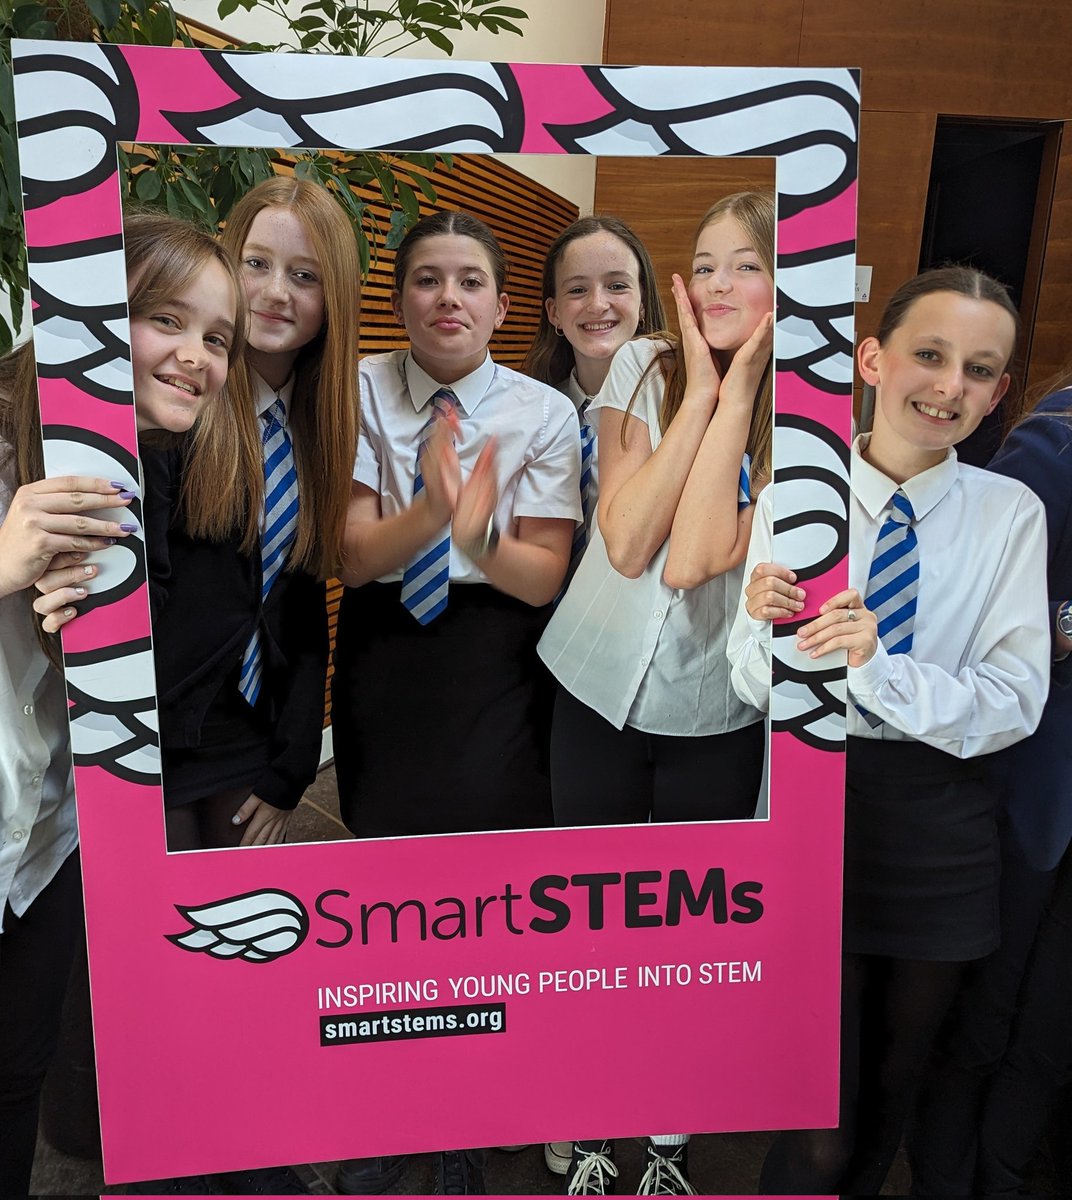 Thank you so much to @SmartSTEMs and  @NatWestGroup for a brilliant day learning about tech 🤩
#CollablsKey #WomenInSTEM